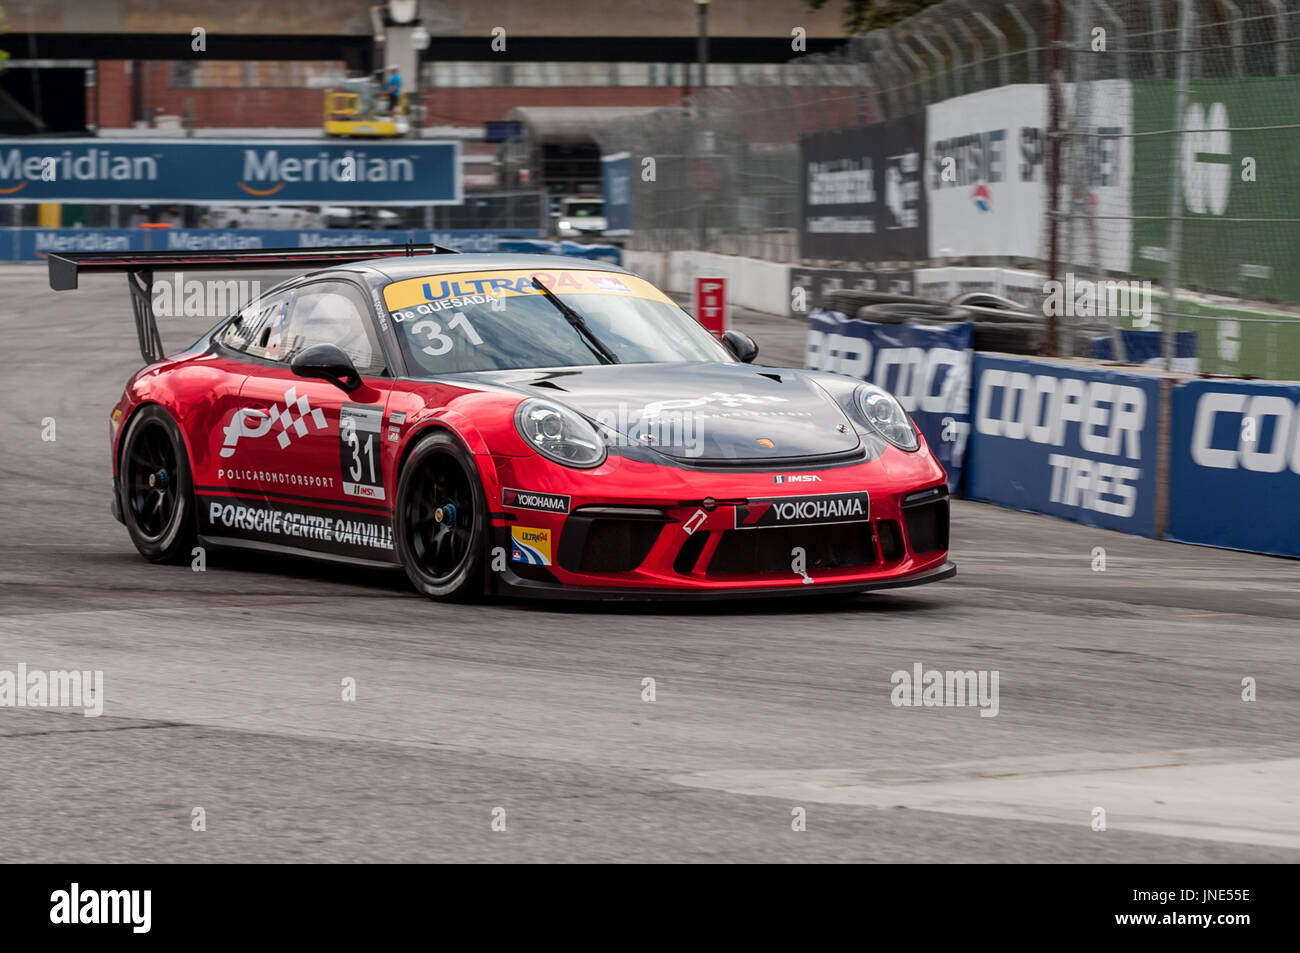 TORONTO, ON - JULY 16: Car during the Porsche Ultra 94 GT3 Cup Challenge Race at Exhibition Place in Toronto, ON, Canada on July 16 2017 Stock Photo